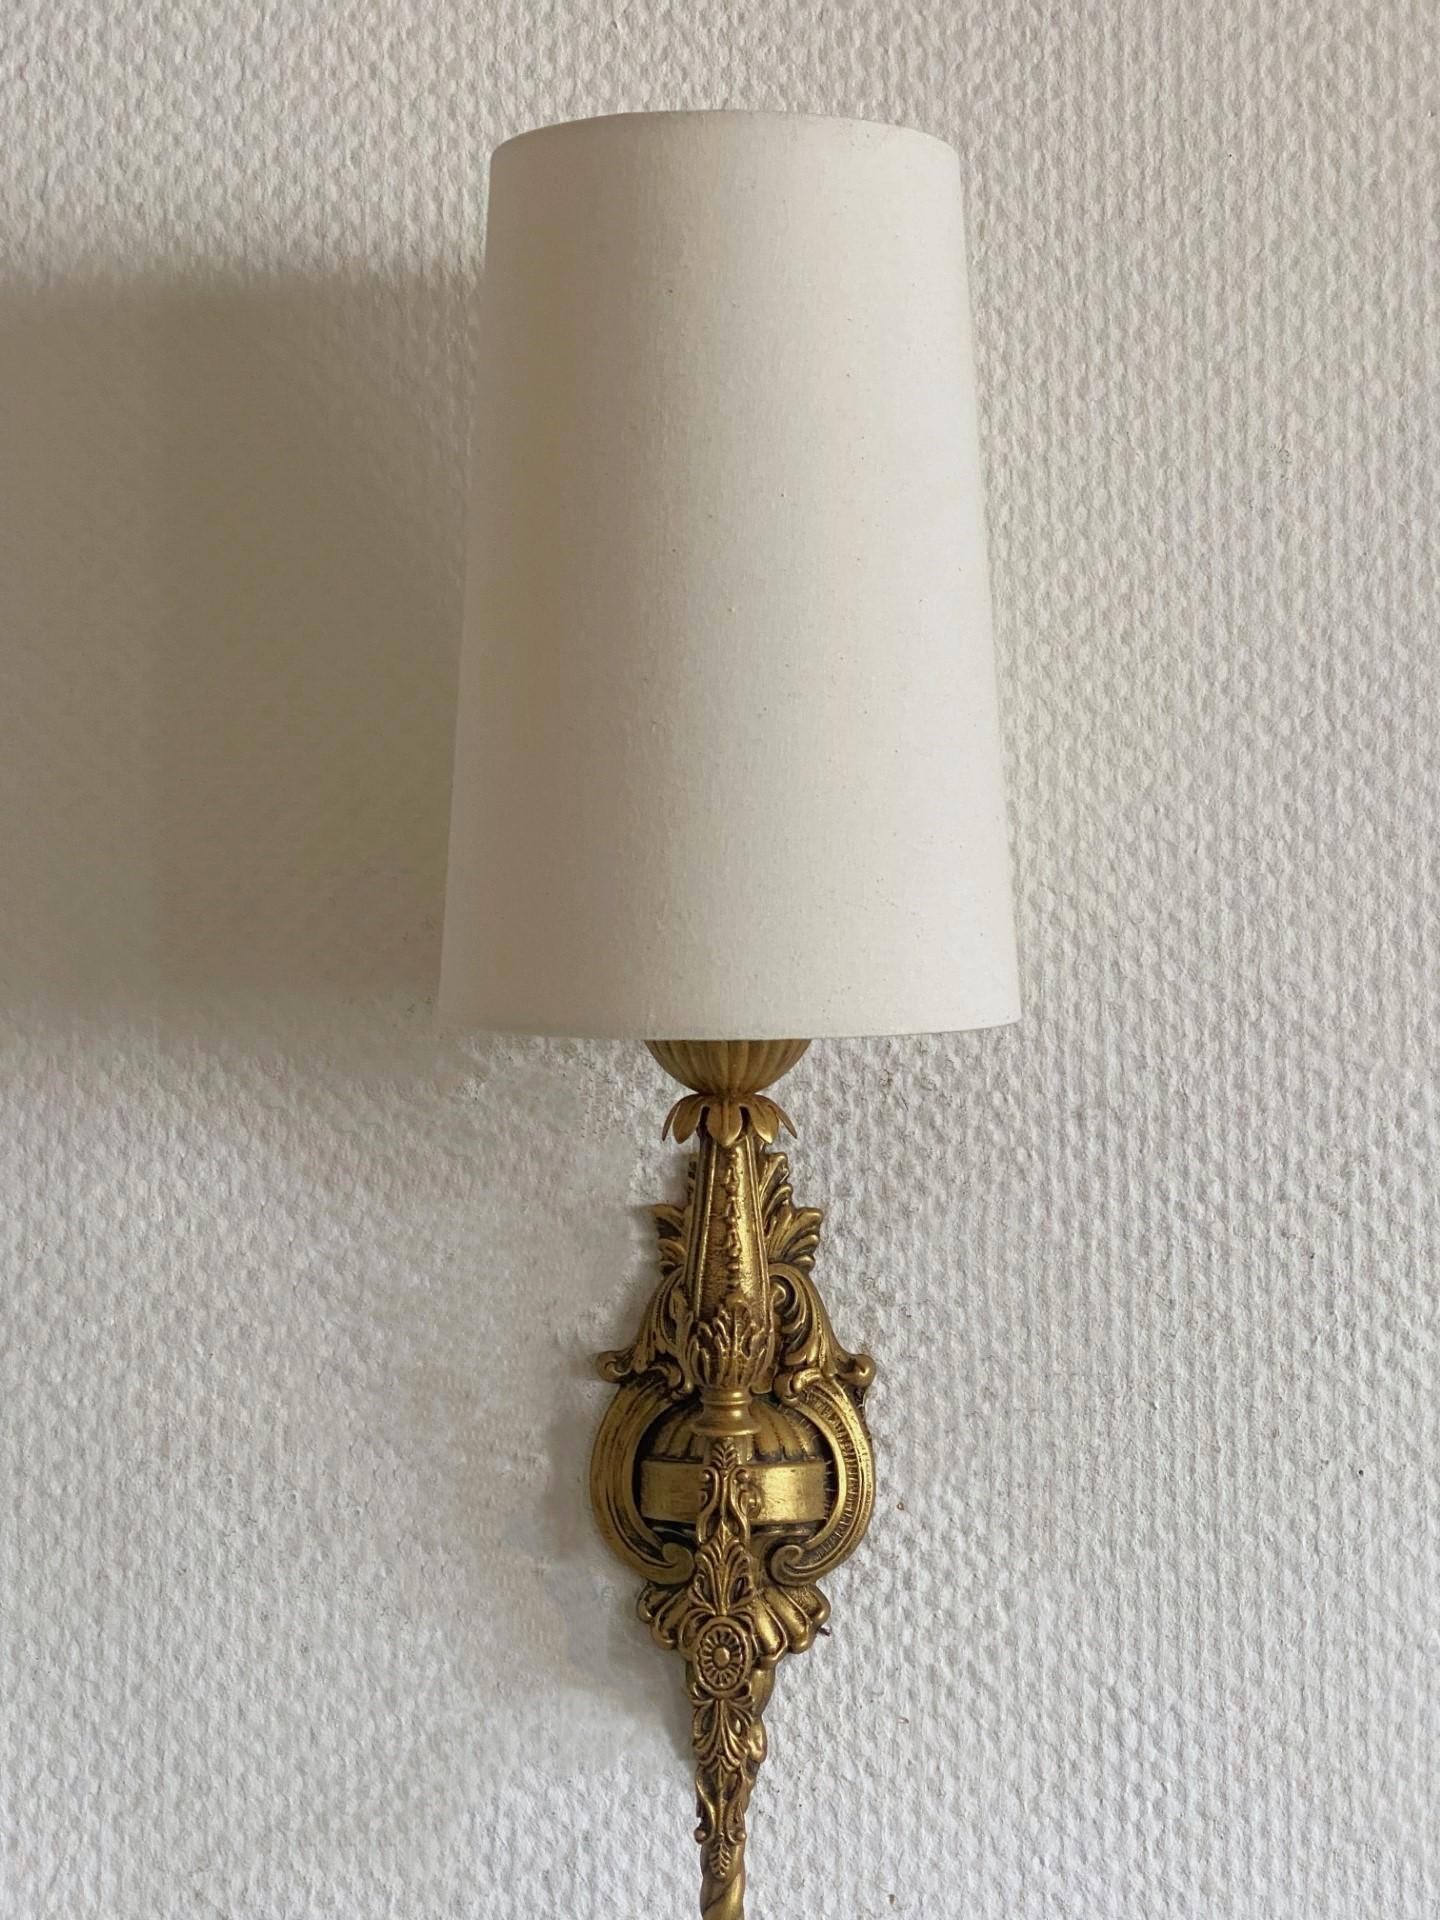 Pair of French Tall Art Deco Bronze Torchiere Wall Sconces, 1930s For Sale 4